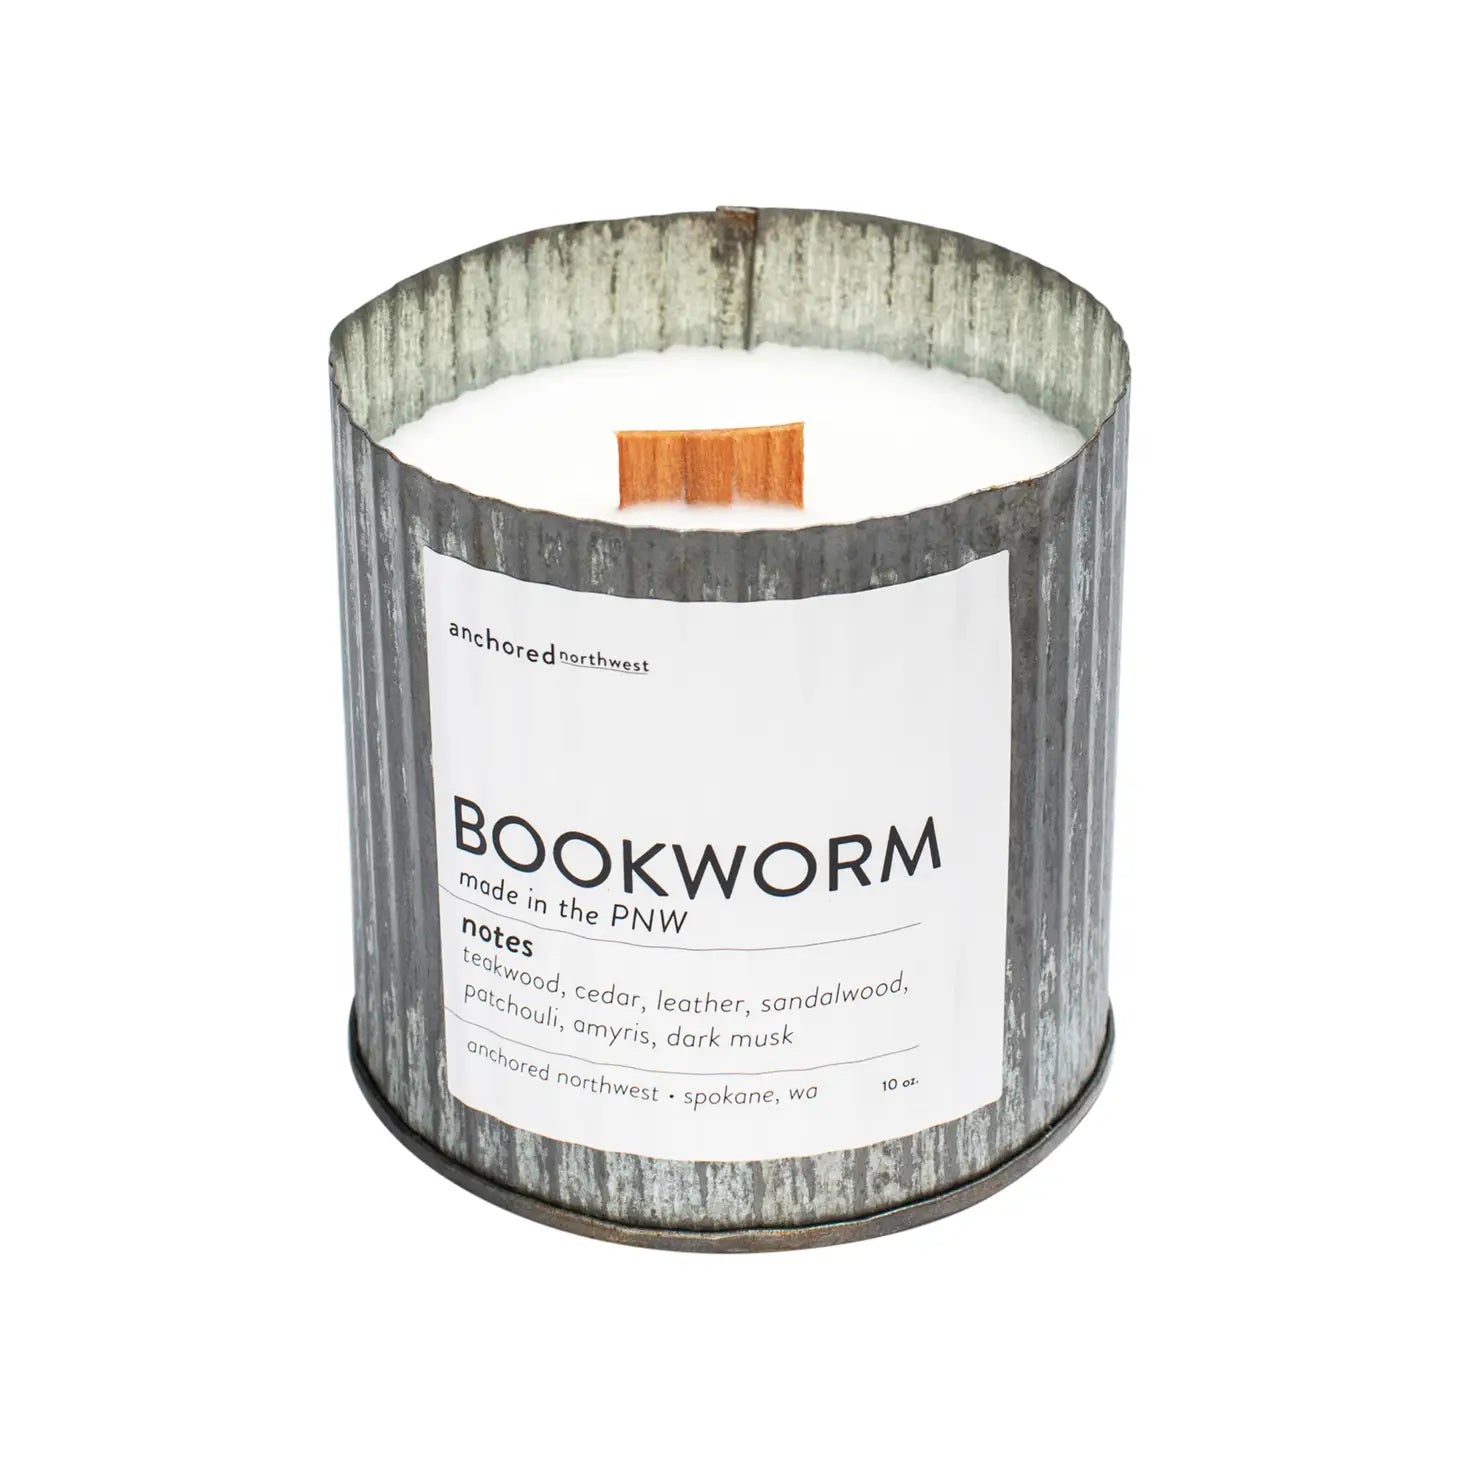 Bookworm Wood Wick Rustic Candle